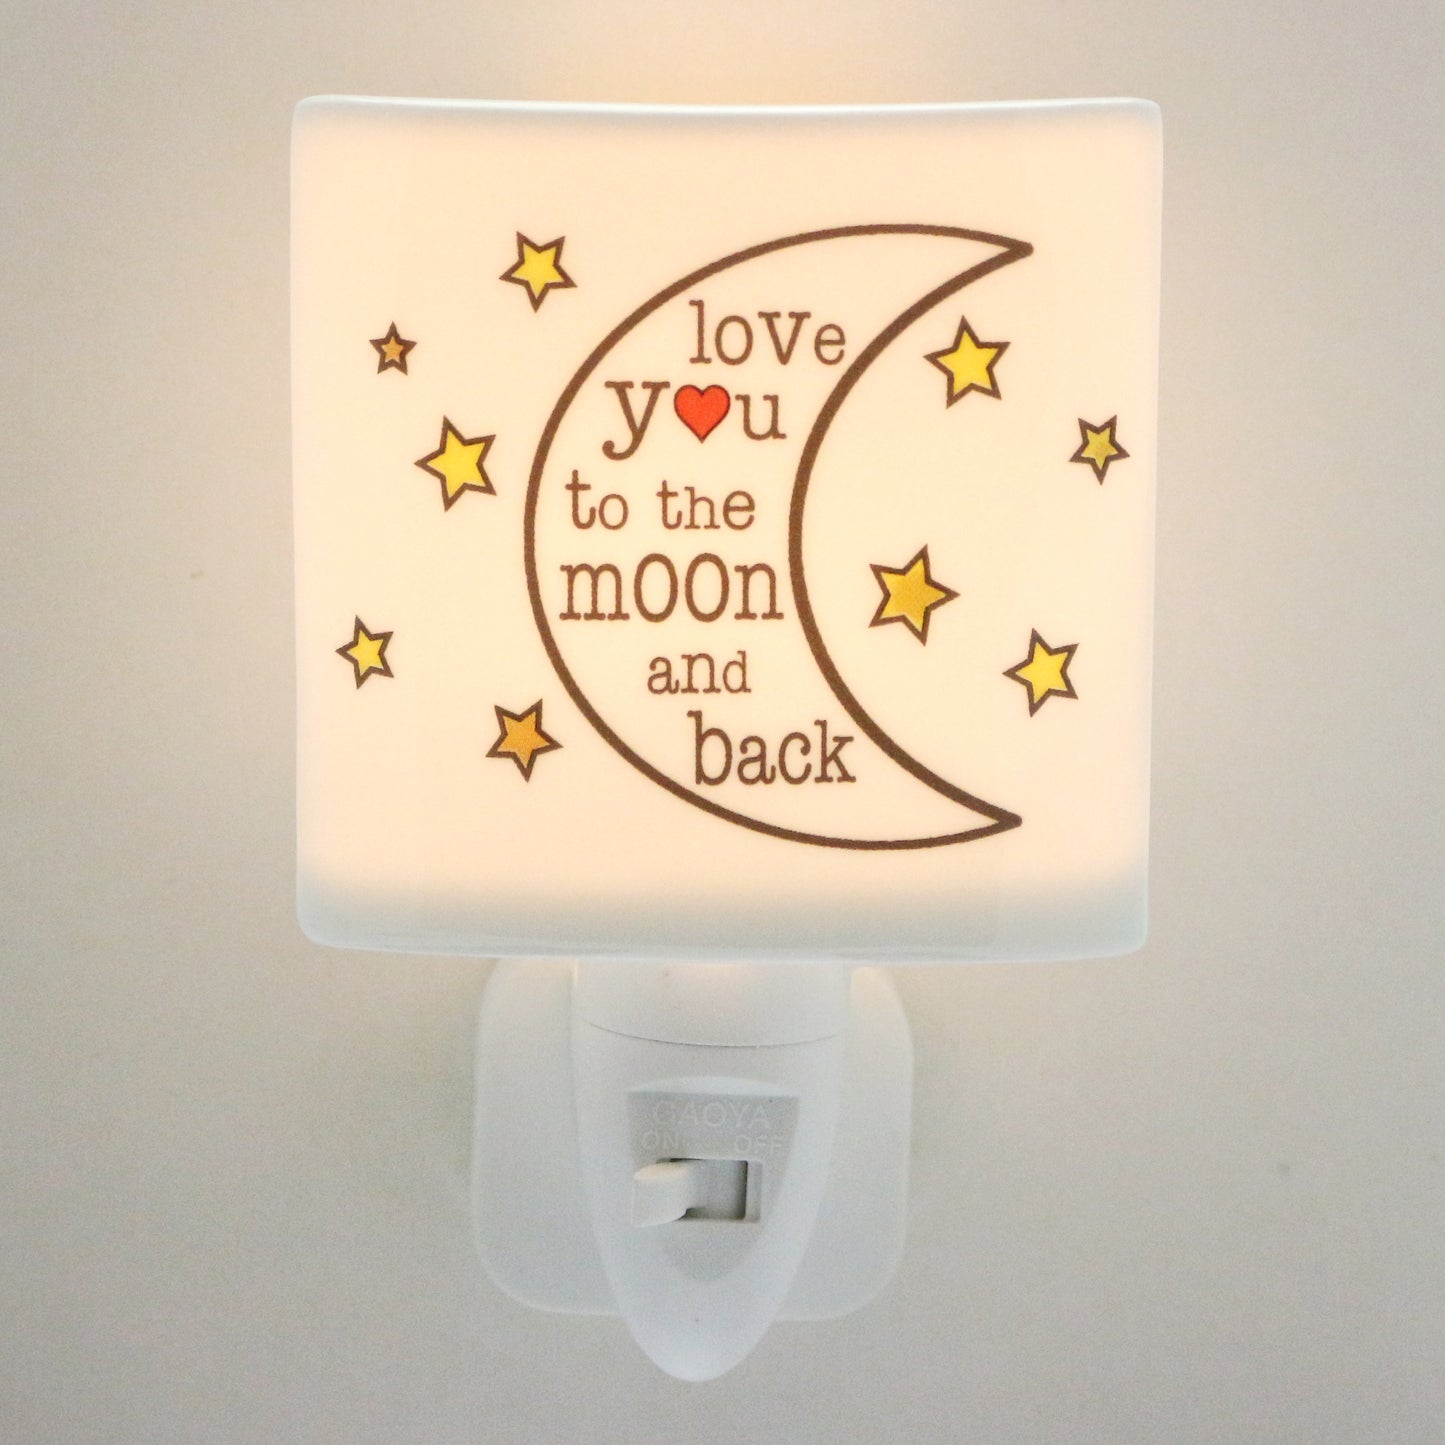 LED Ceramic Night Light - Love you to the Moon and Back